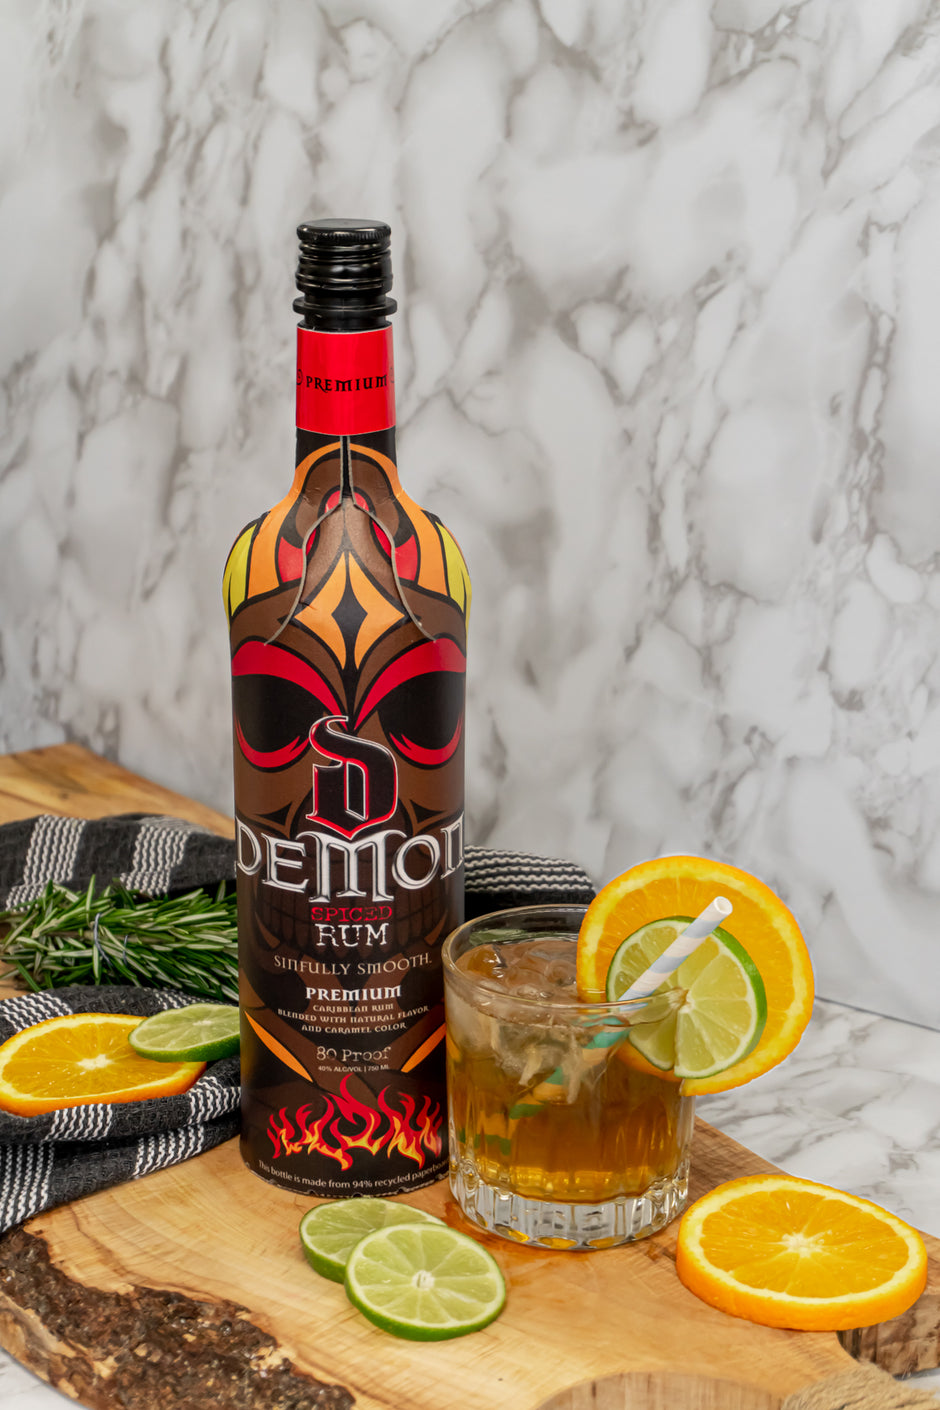 (PRESALE) Demon Spiced Rum in the New Eco Bottle